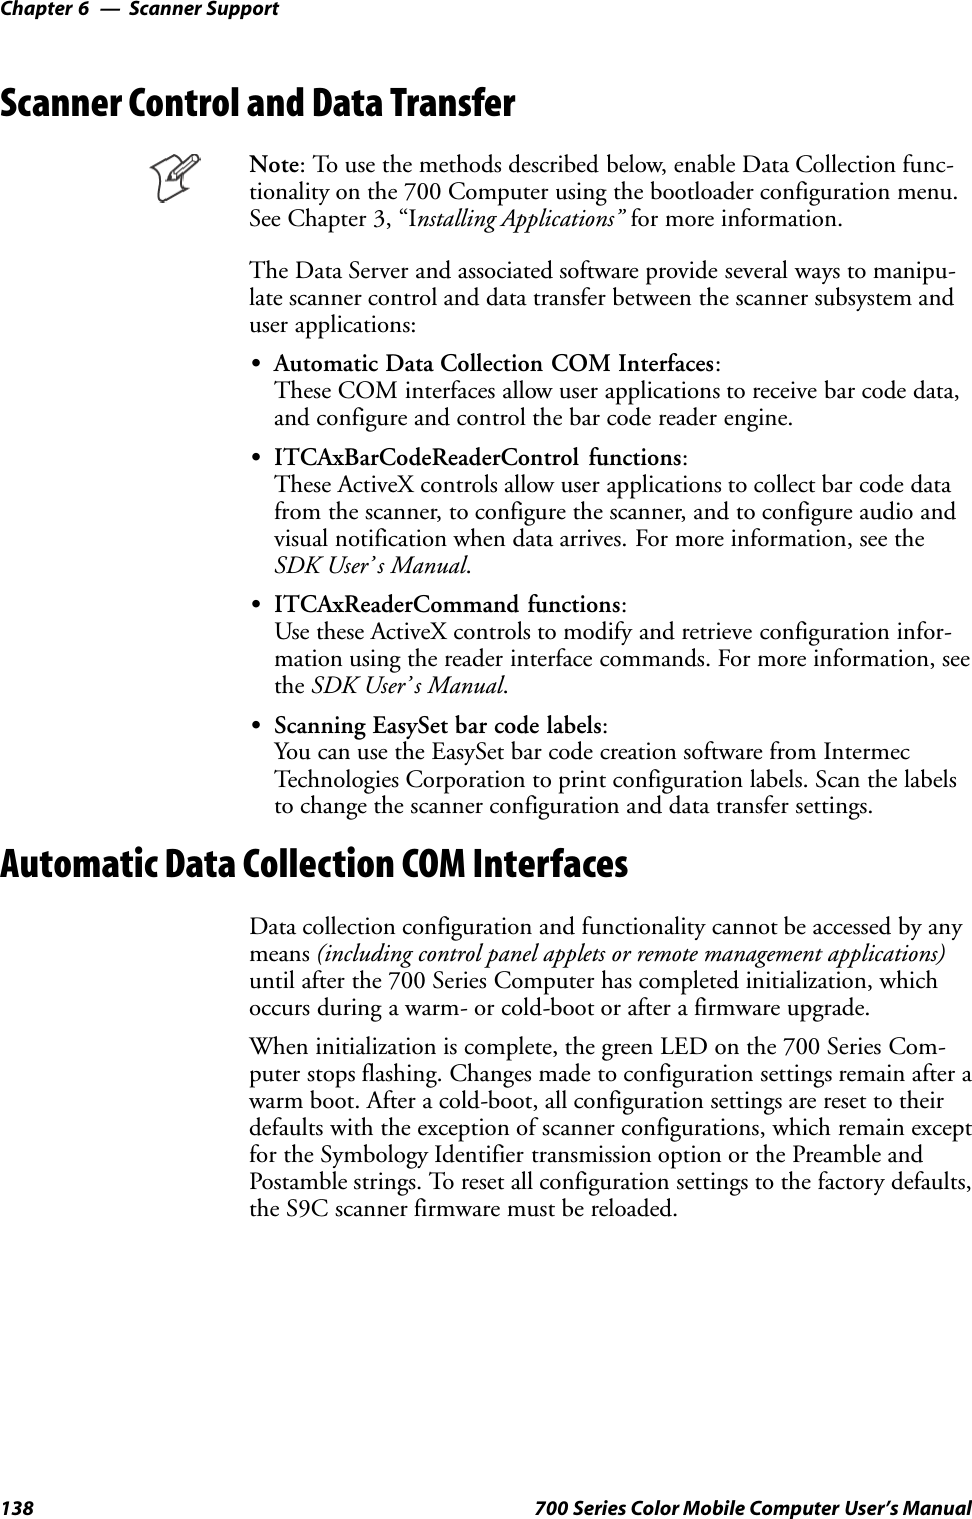 Scanner SupportChapter —6138 700 Series Color Mobile Computer User’s ManualScanner Control and Data TransferNote: To use the methods described below, enable Data Collection func-tionality on the 700 Computer using the bootloader configuration menu.See Chapter 3, “Installing Applications” for more information.The Data Server and associated software provide several ways to manipu-late scanner control and data transfer between the scanner subsystem anduser applications:SAutomatic Data Collection COM Interfaces:These COM interfaces allow user applications to receive bar code data,and configure and control the bar code reader engine.SITCAxBarCodeReaderControl functions:These ActiveX controls allow user applications to collect bar code datafrom the scanner, to configure the scanner, and to configure audio andvisual notification when data arrives. For more information, see theSDK User’ s Manual.SITCAxReaderCommand functions:Use these ActiveX controls to modify and retrieve configuration infor-mation using the reader interface commands. For more information, seethe SDK User’ s Manual.SScanning EasySet bar code labels:You can use the EasySet bar code creation software from IntermecTechnologies Corporation to print configuration labels. Scan the labelsto change the scanner configuration and data transfer settings.Automatic Data Collection COM InterfacesData collection configuration and functionality cannot be accessed by anymeans (including control panel applets or remote management applications)until after the 700 Series Computer has completed initialization, whichoccurs during a warm- or cold-boot or after a firmware upgrade.When initialization is complete, the green LED on the 700 Series Com-puter stops flashing. Changes made to configuration settings remain after awarm boot. After a cold-boot, all configuration settings are reset to theirdefaults with the exception of scanner configurations, which remain exceptfor the Symbology Identifier transmission option or the Preamble andPostamble strings. To reset all configuration settings to the factory defaults,the S9C scanner firmware must be reloaded.